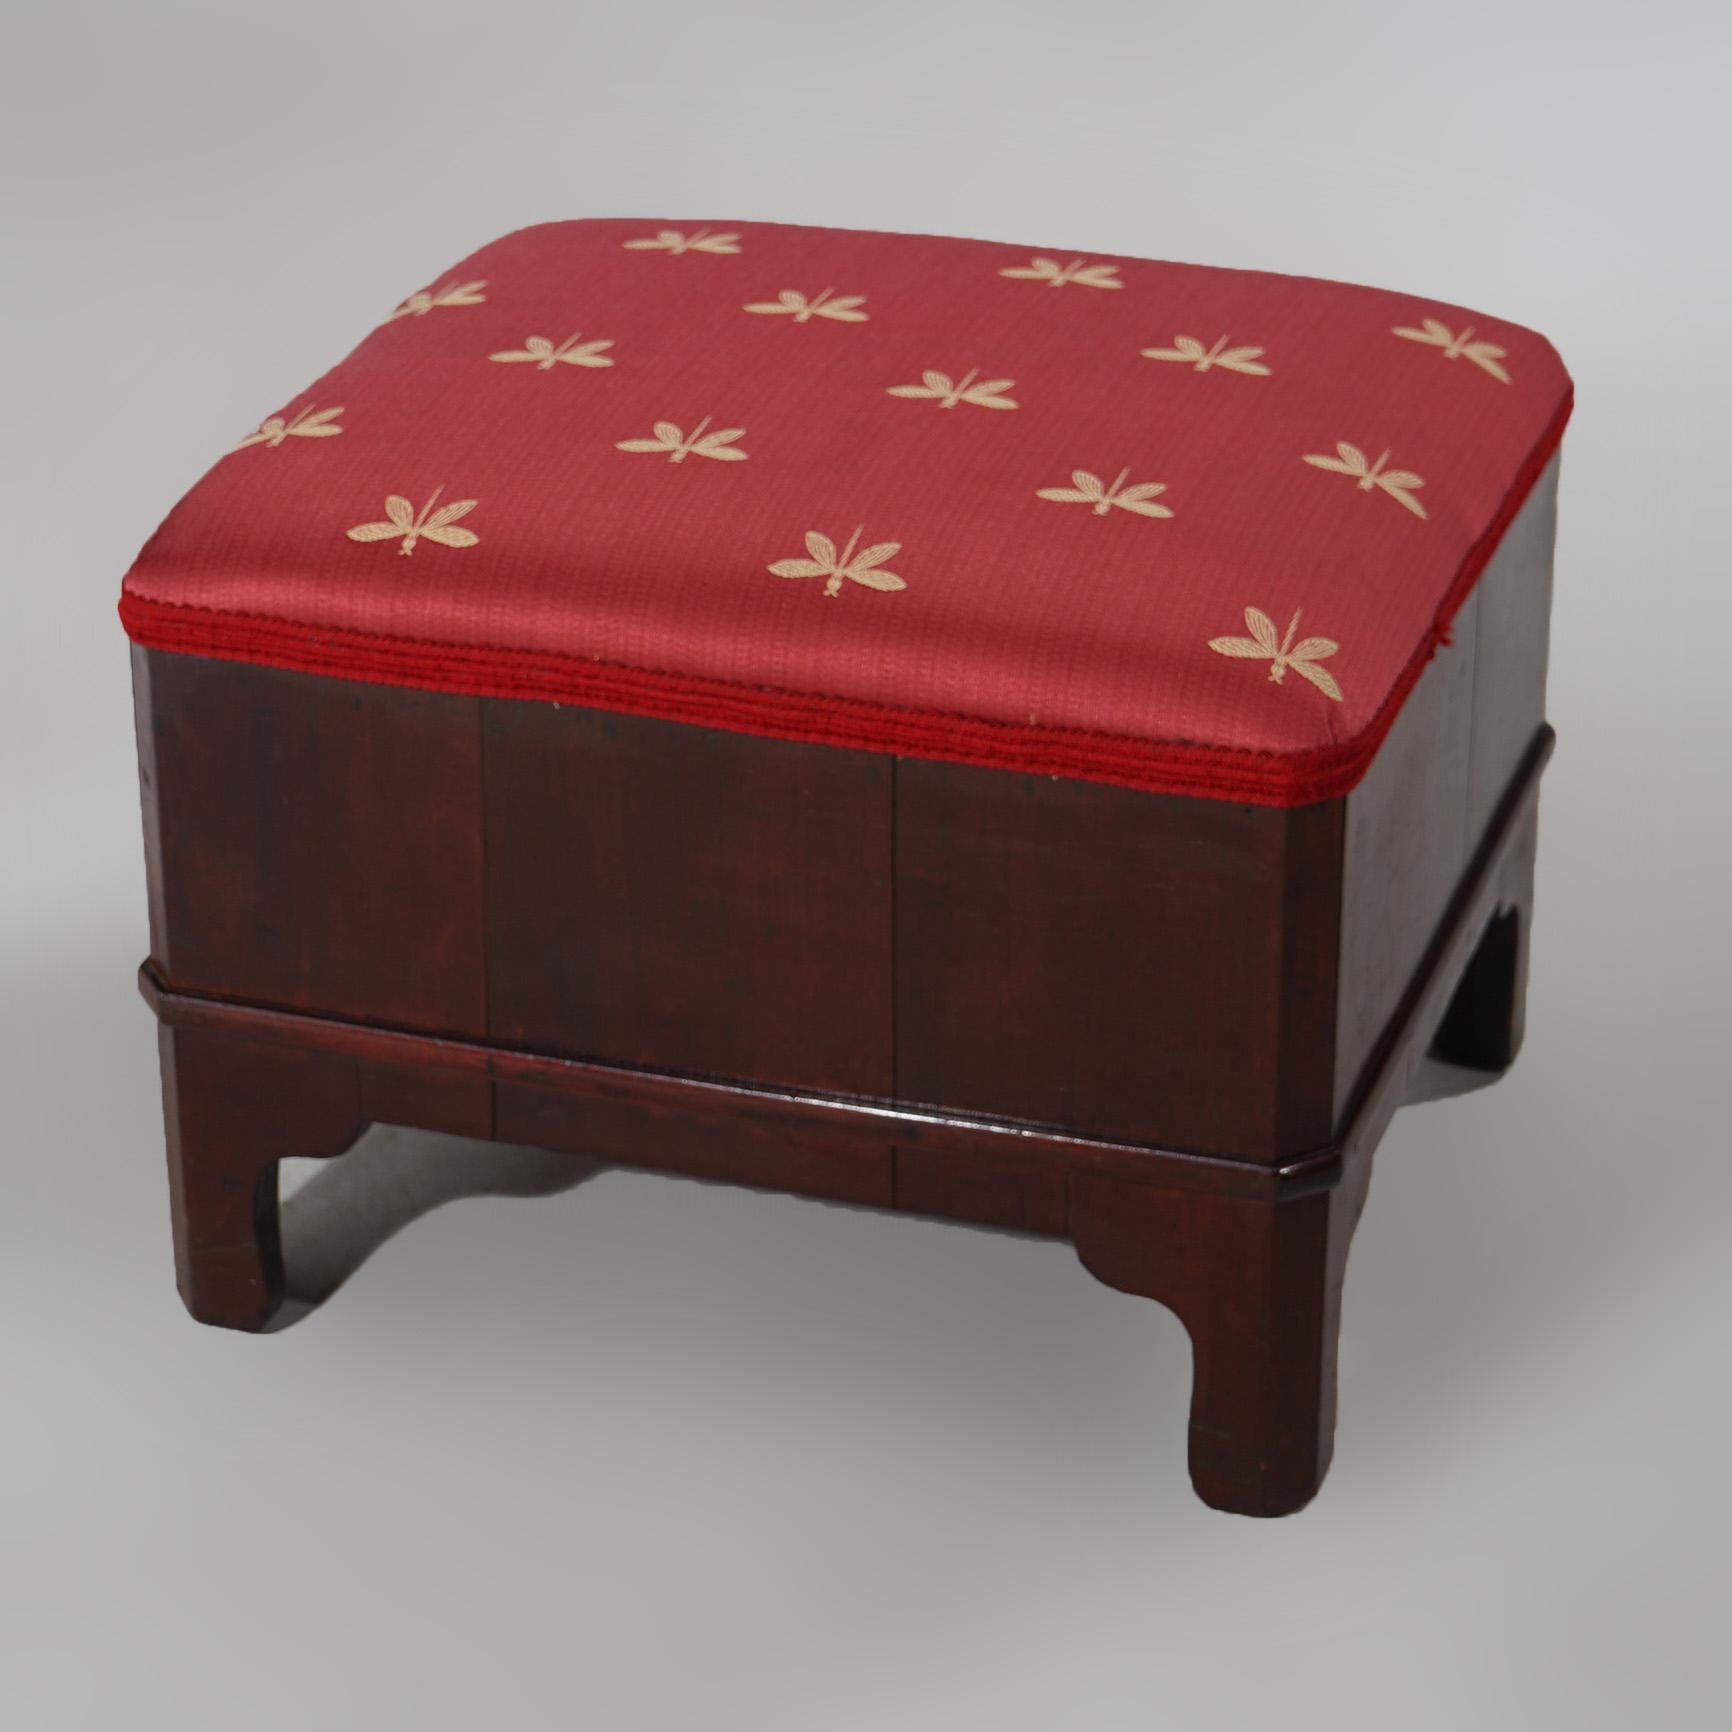 19th Century Antique Classical American Empire Mahogany Stool C1840’s For Sale